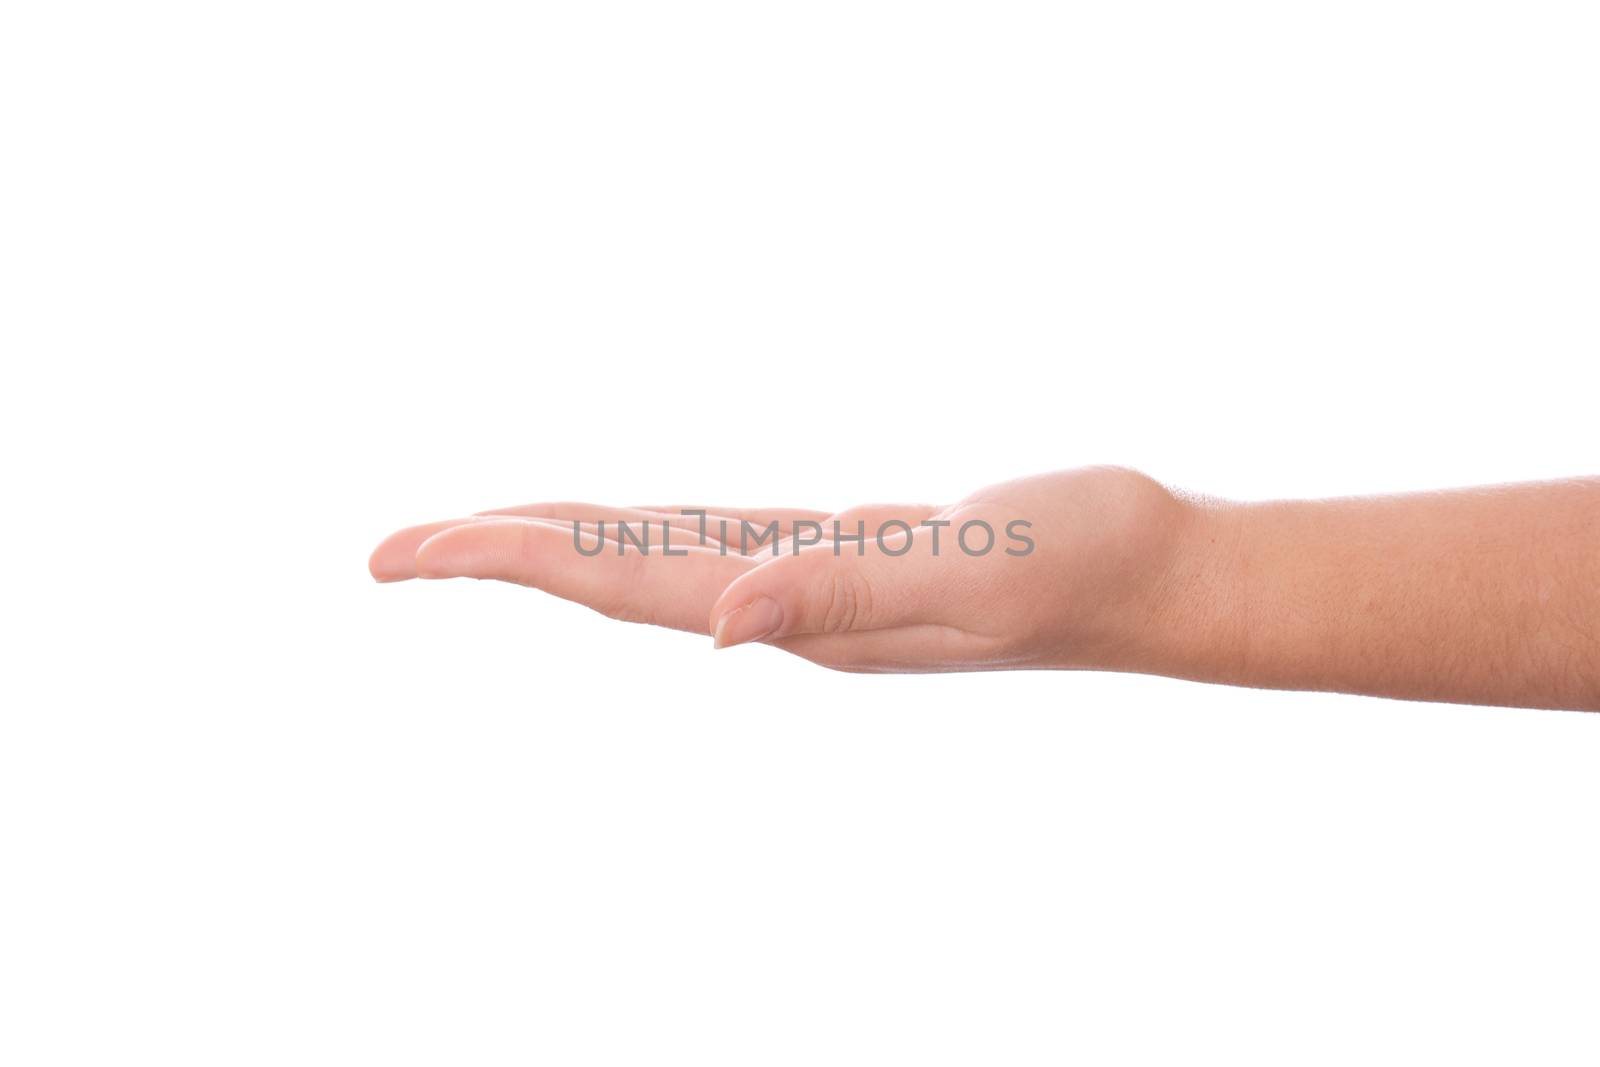 Woman's open hand on a white background